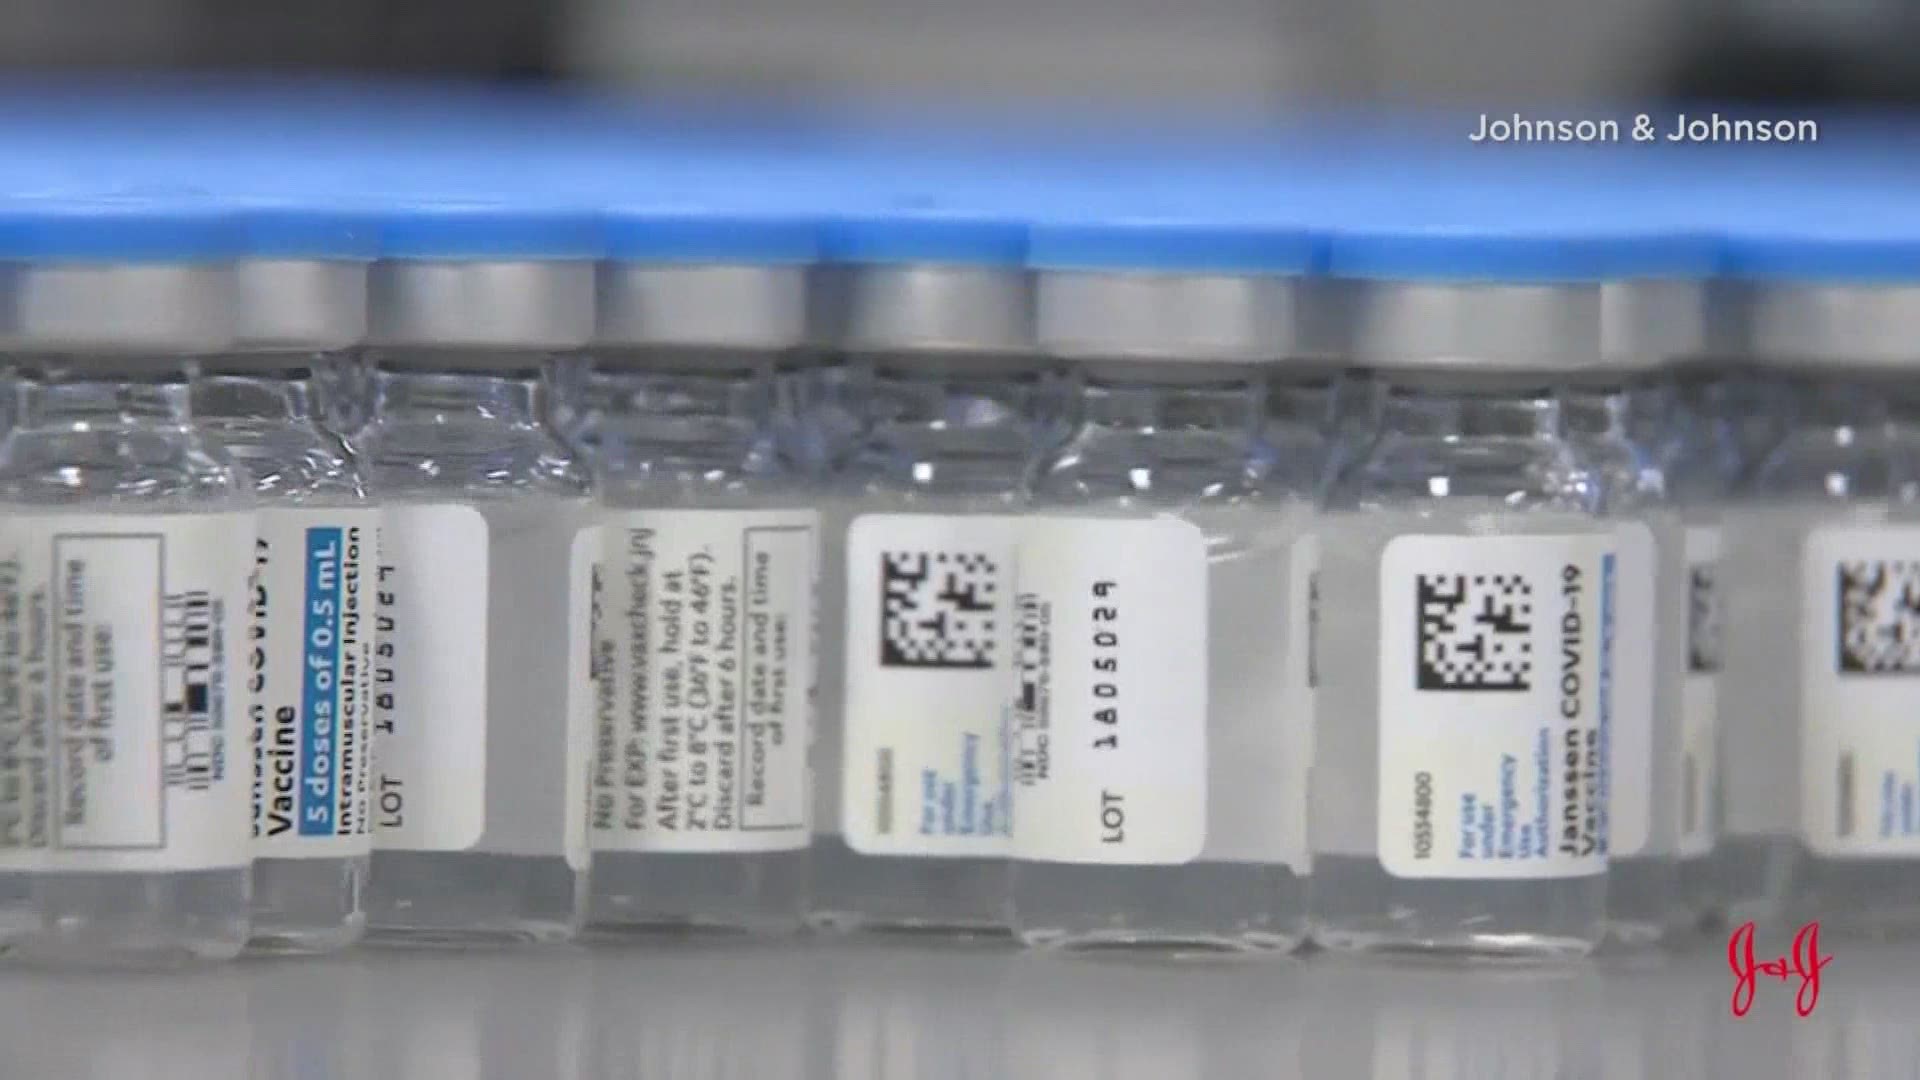 The J&J vaccine is now back in the rotation after being paused due to claims of it causing blood clots.